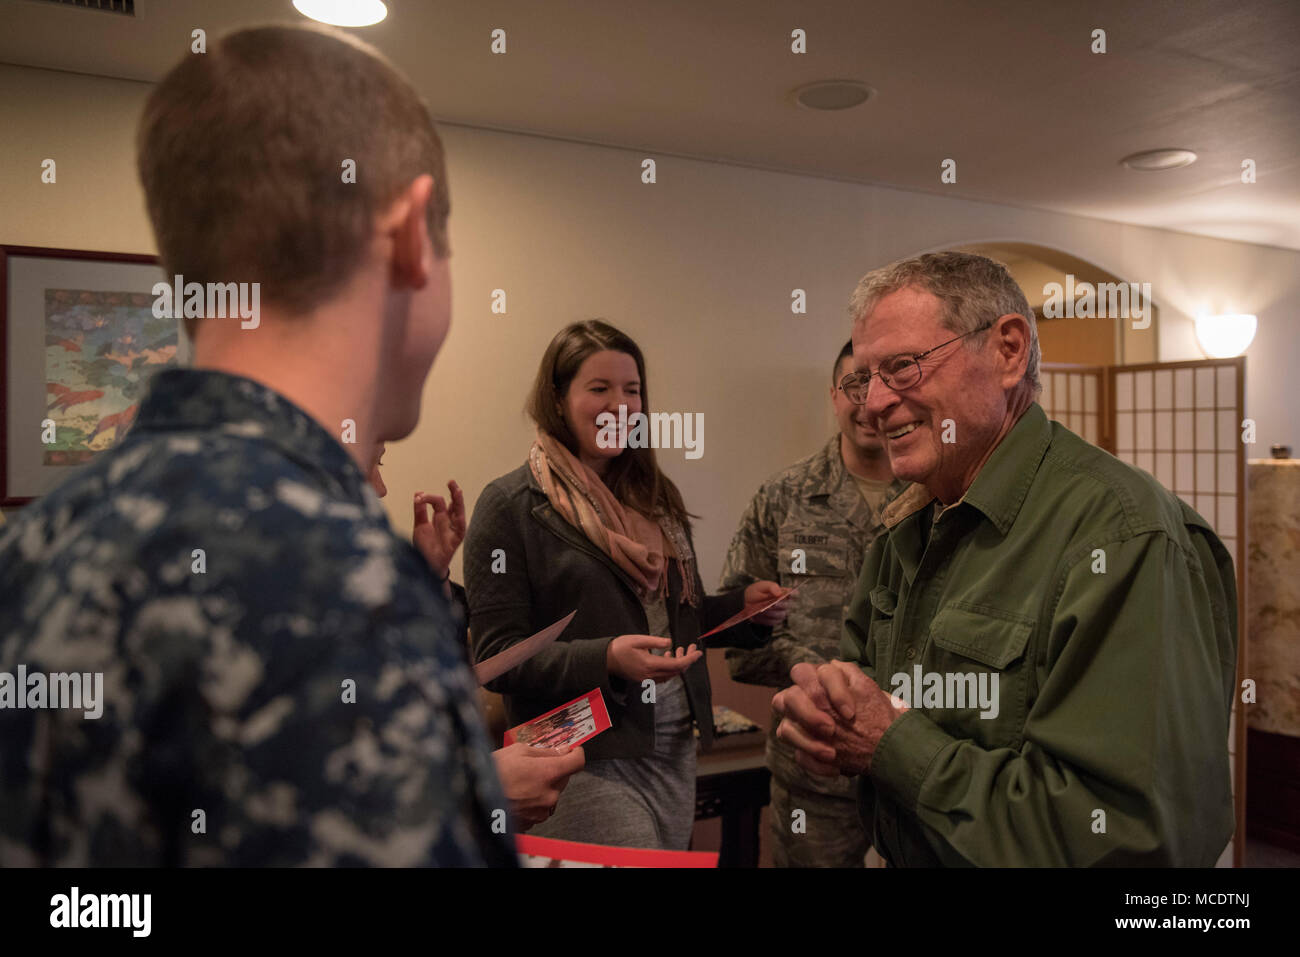 Sen. James Inhofe, R-O.K., shares cards with service members from Oklahoma during a meet and greet at Yokota Air Base, Japan, Feb. 25, 2018. Prior to departing Japan, Inhofe and other members of the congressional delegation composed of Senate and House Armed Services Committee members, took the time to thank service members from their home states for all that they do. (U.S. Air Force photo by Airman 1st Class Matthew Gilmore) Stock Photo